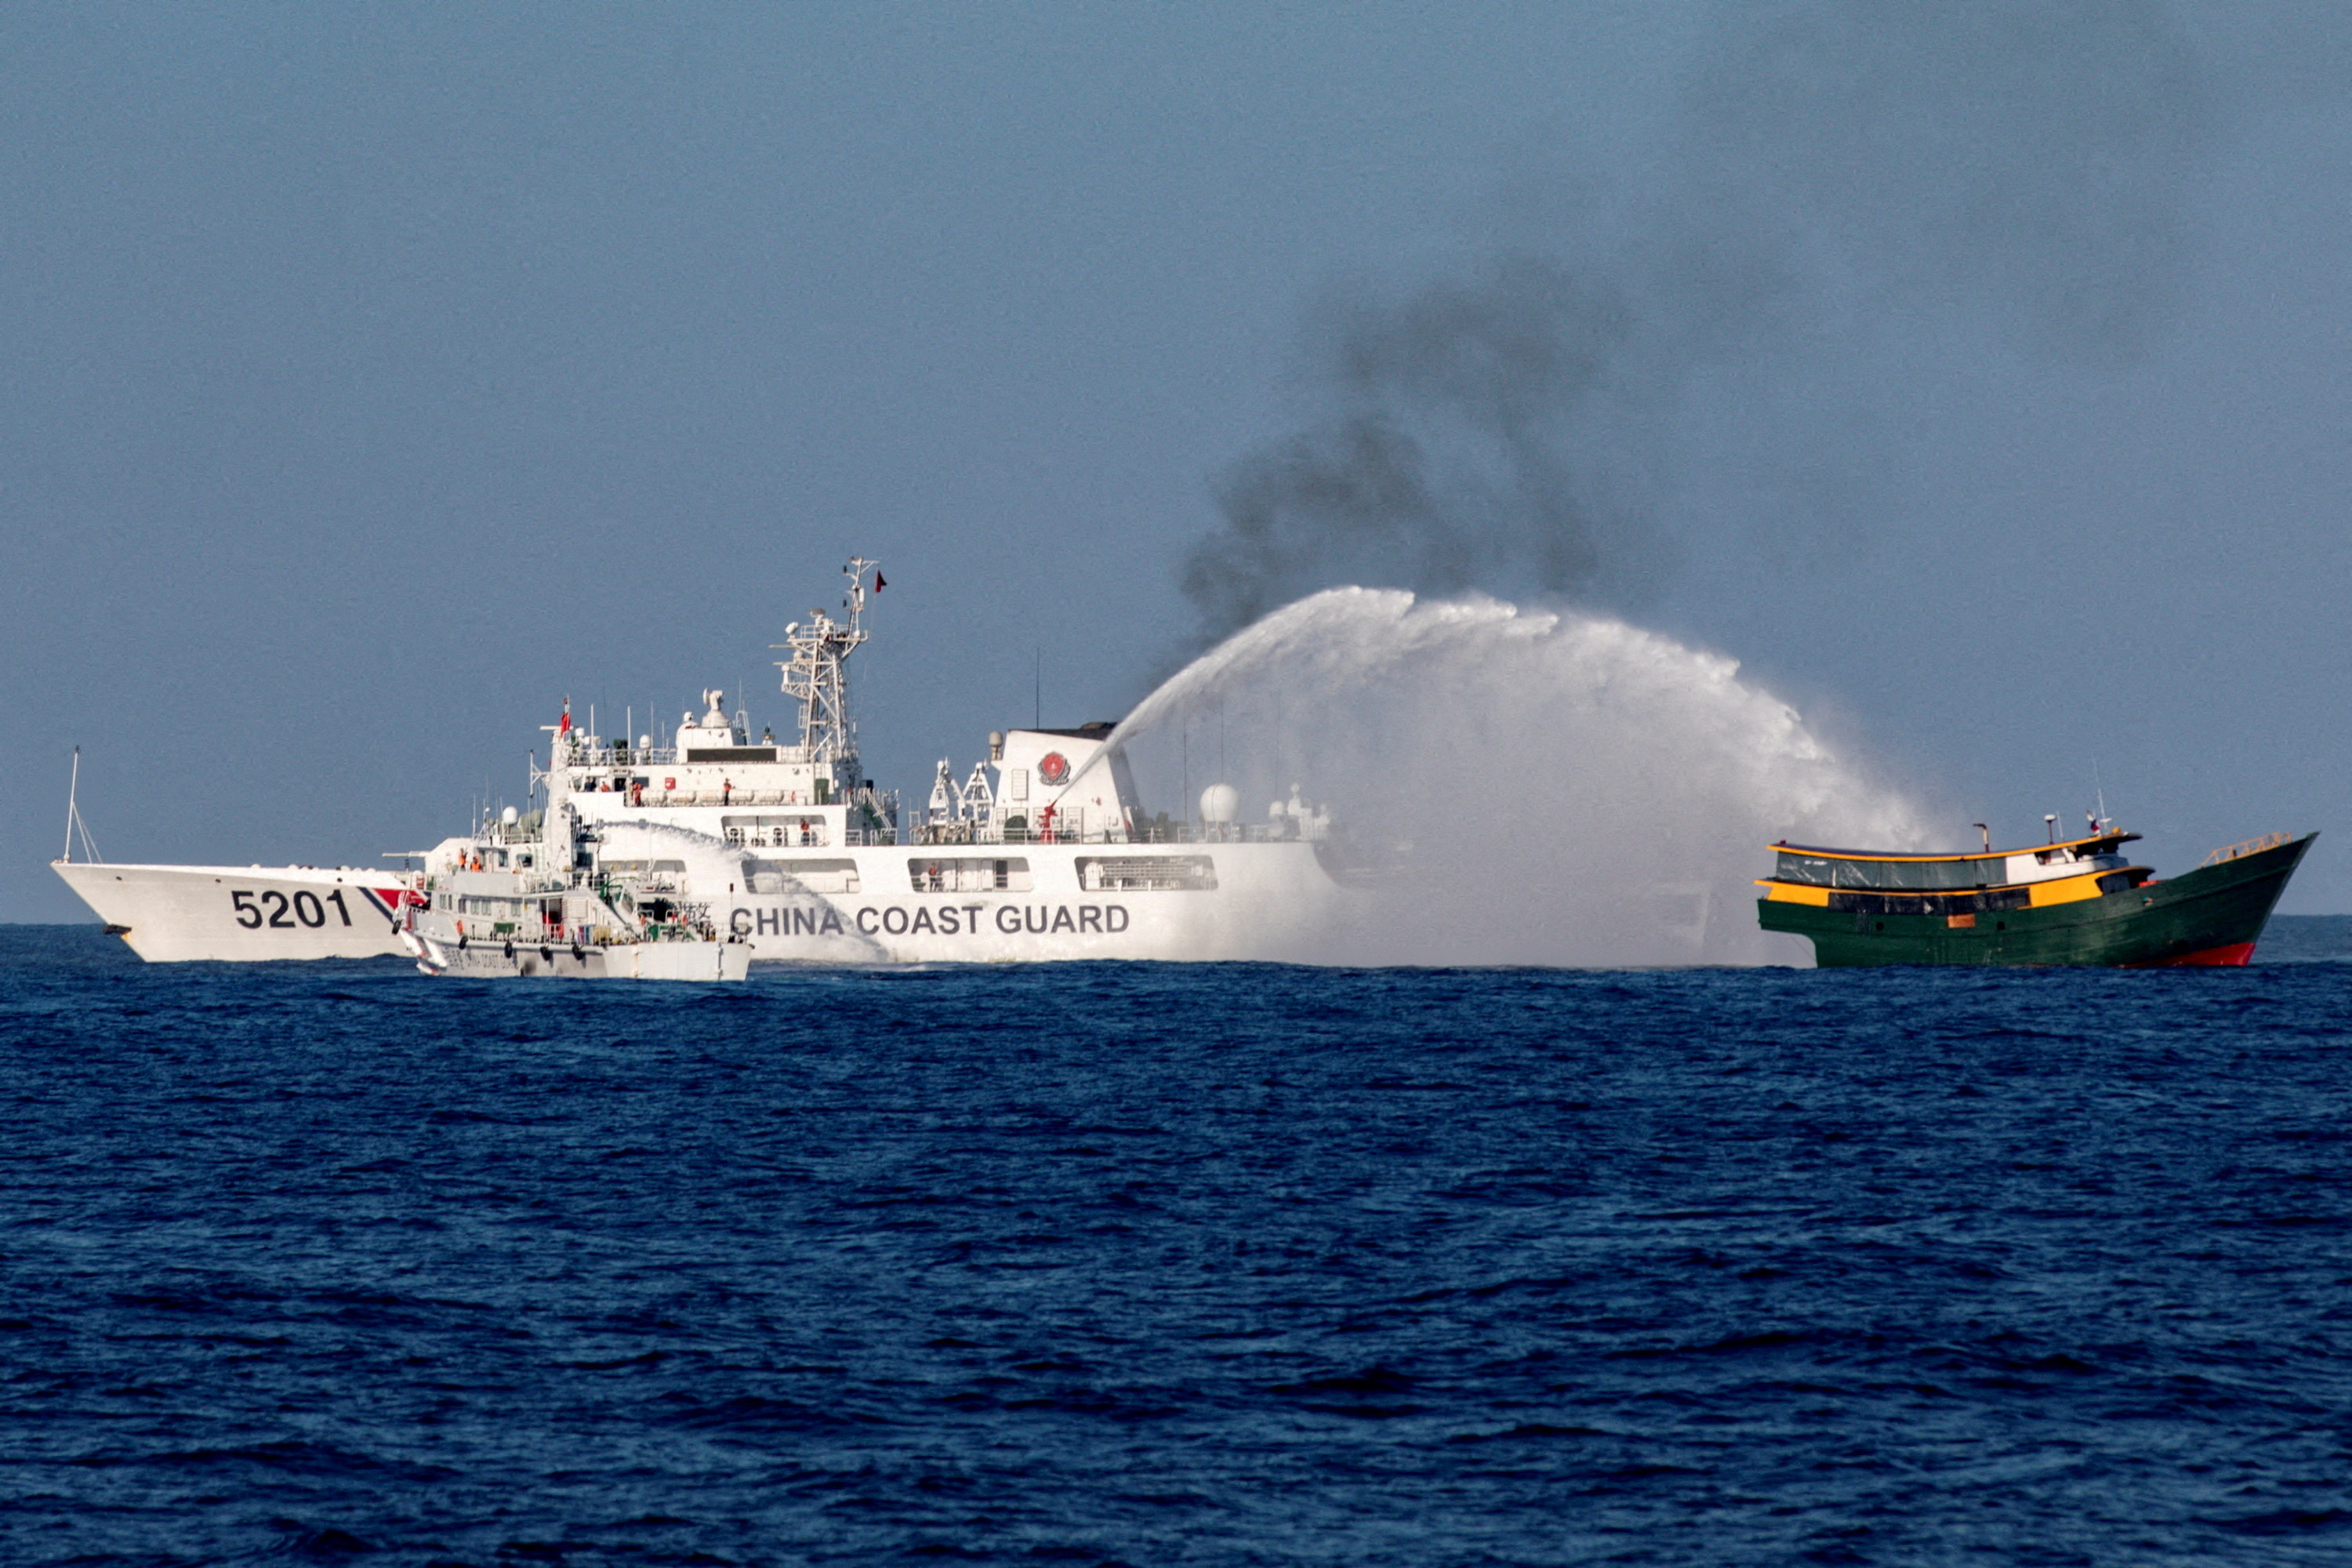 Chinese Coast Guard vessels fire water cannons towards a Philippine resupply vessel Unaizah May 4 as it made its way to the Second Thomas Shoal in the South China Sea